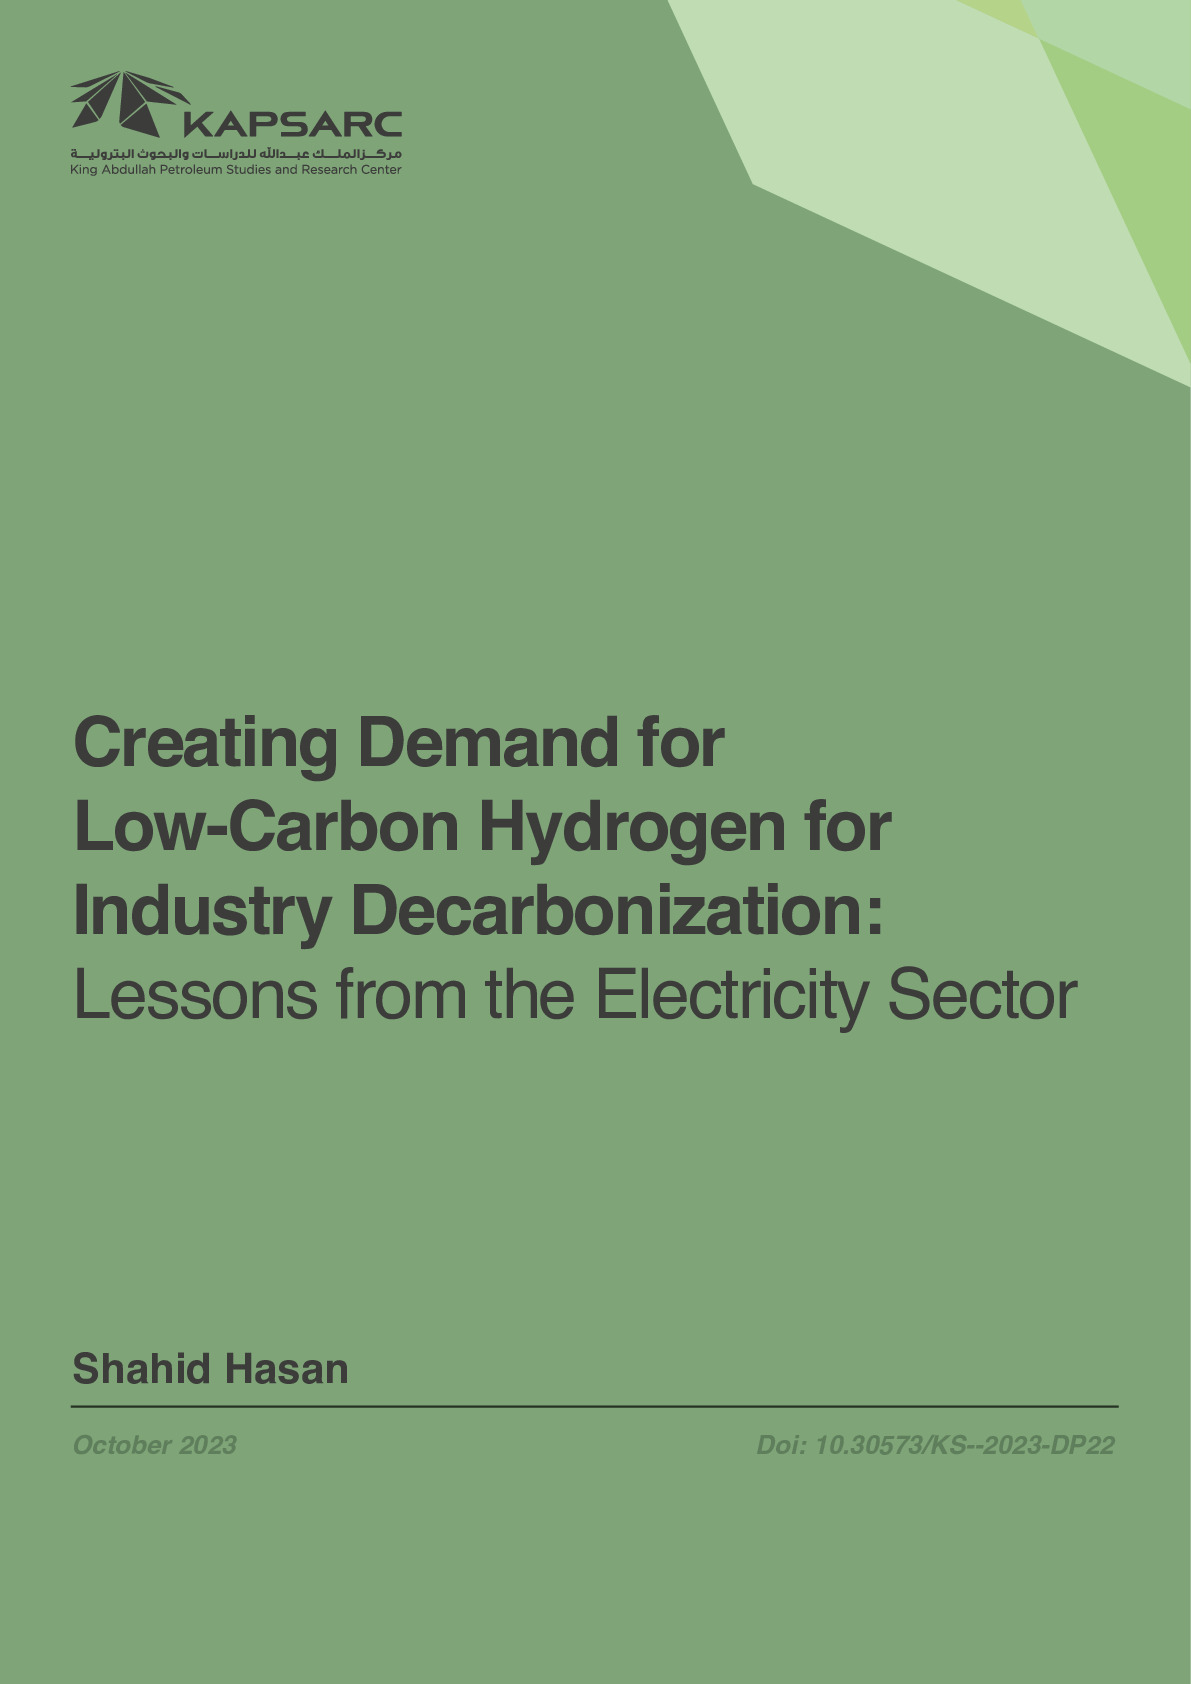 Creating Demand for Low-Carbon Hydrogen for Industry Decarbonization: Lessons from the Electricity Sector